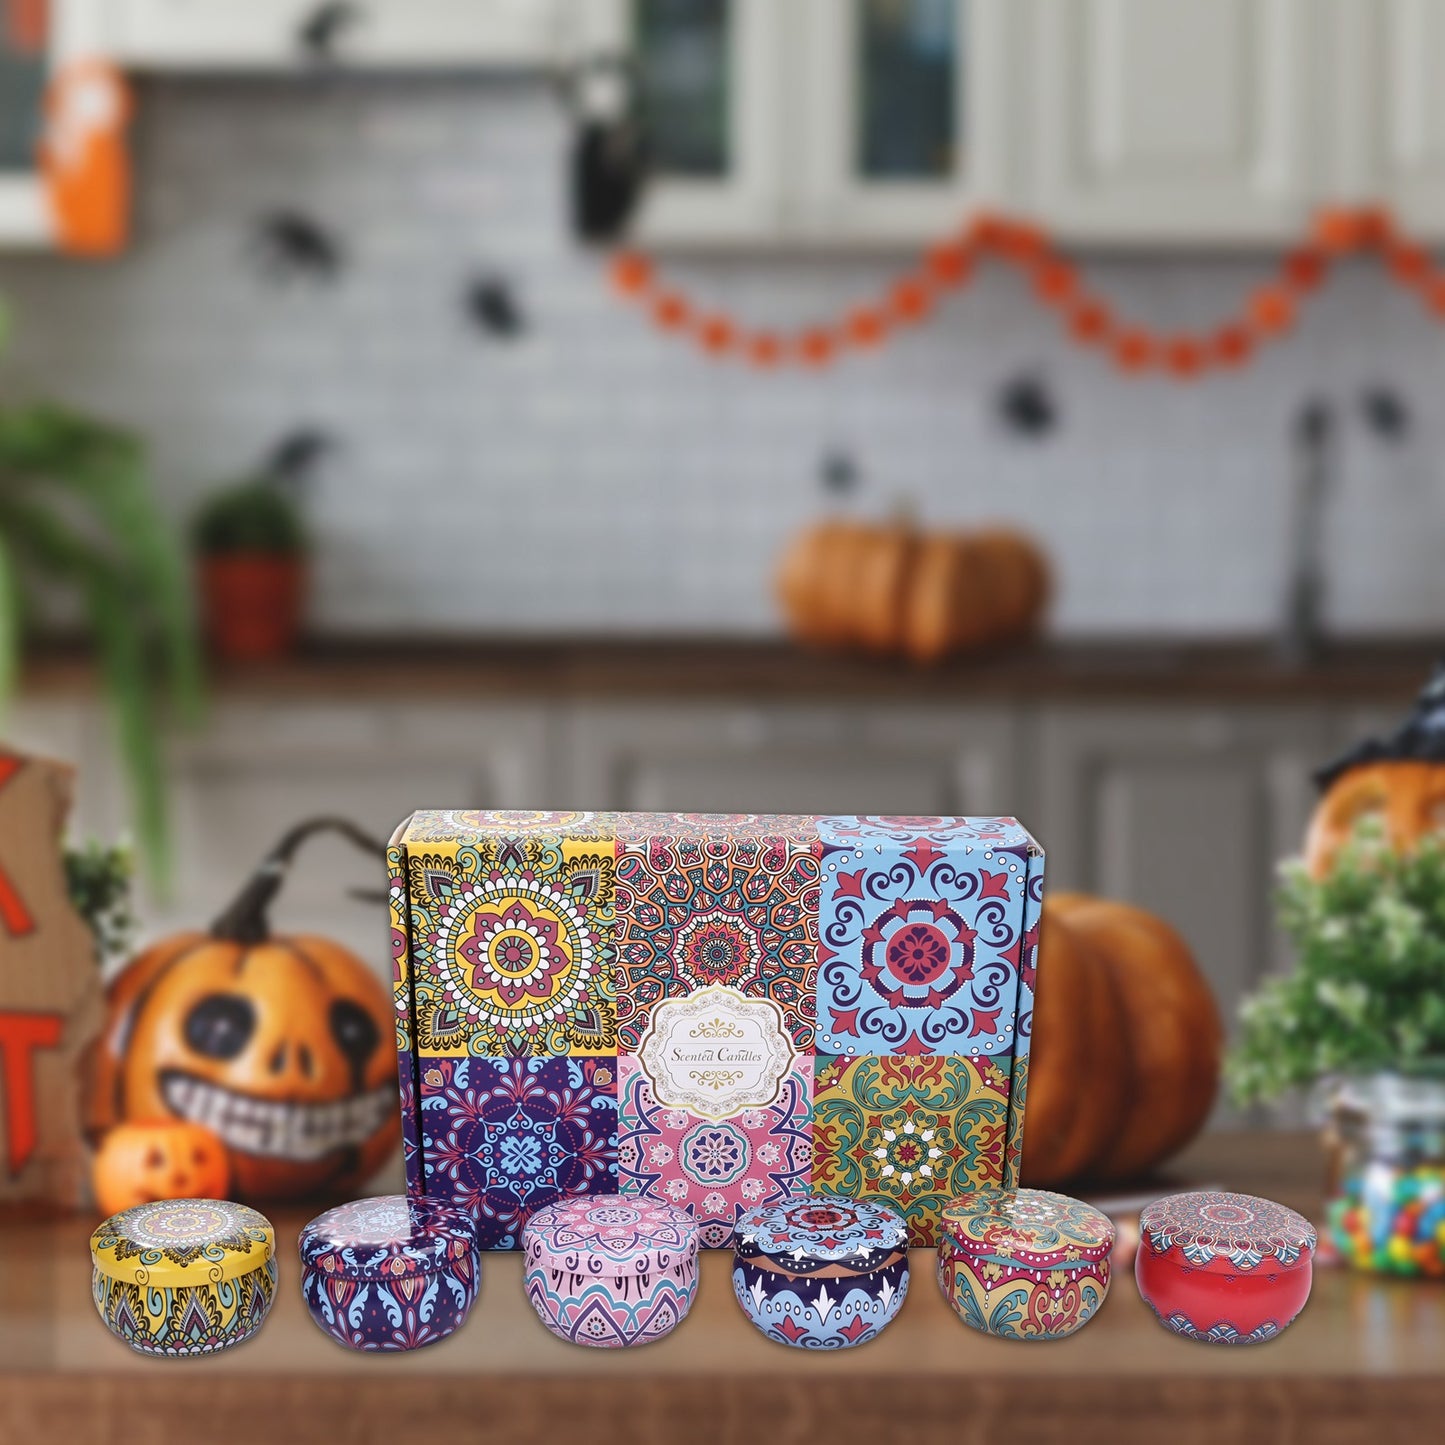 Halloween Scented Candle Gift Set: Scented Candle Home 6-pack